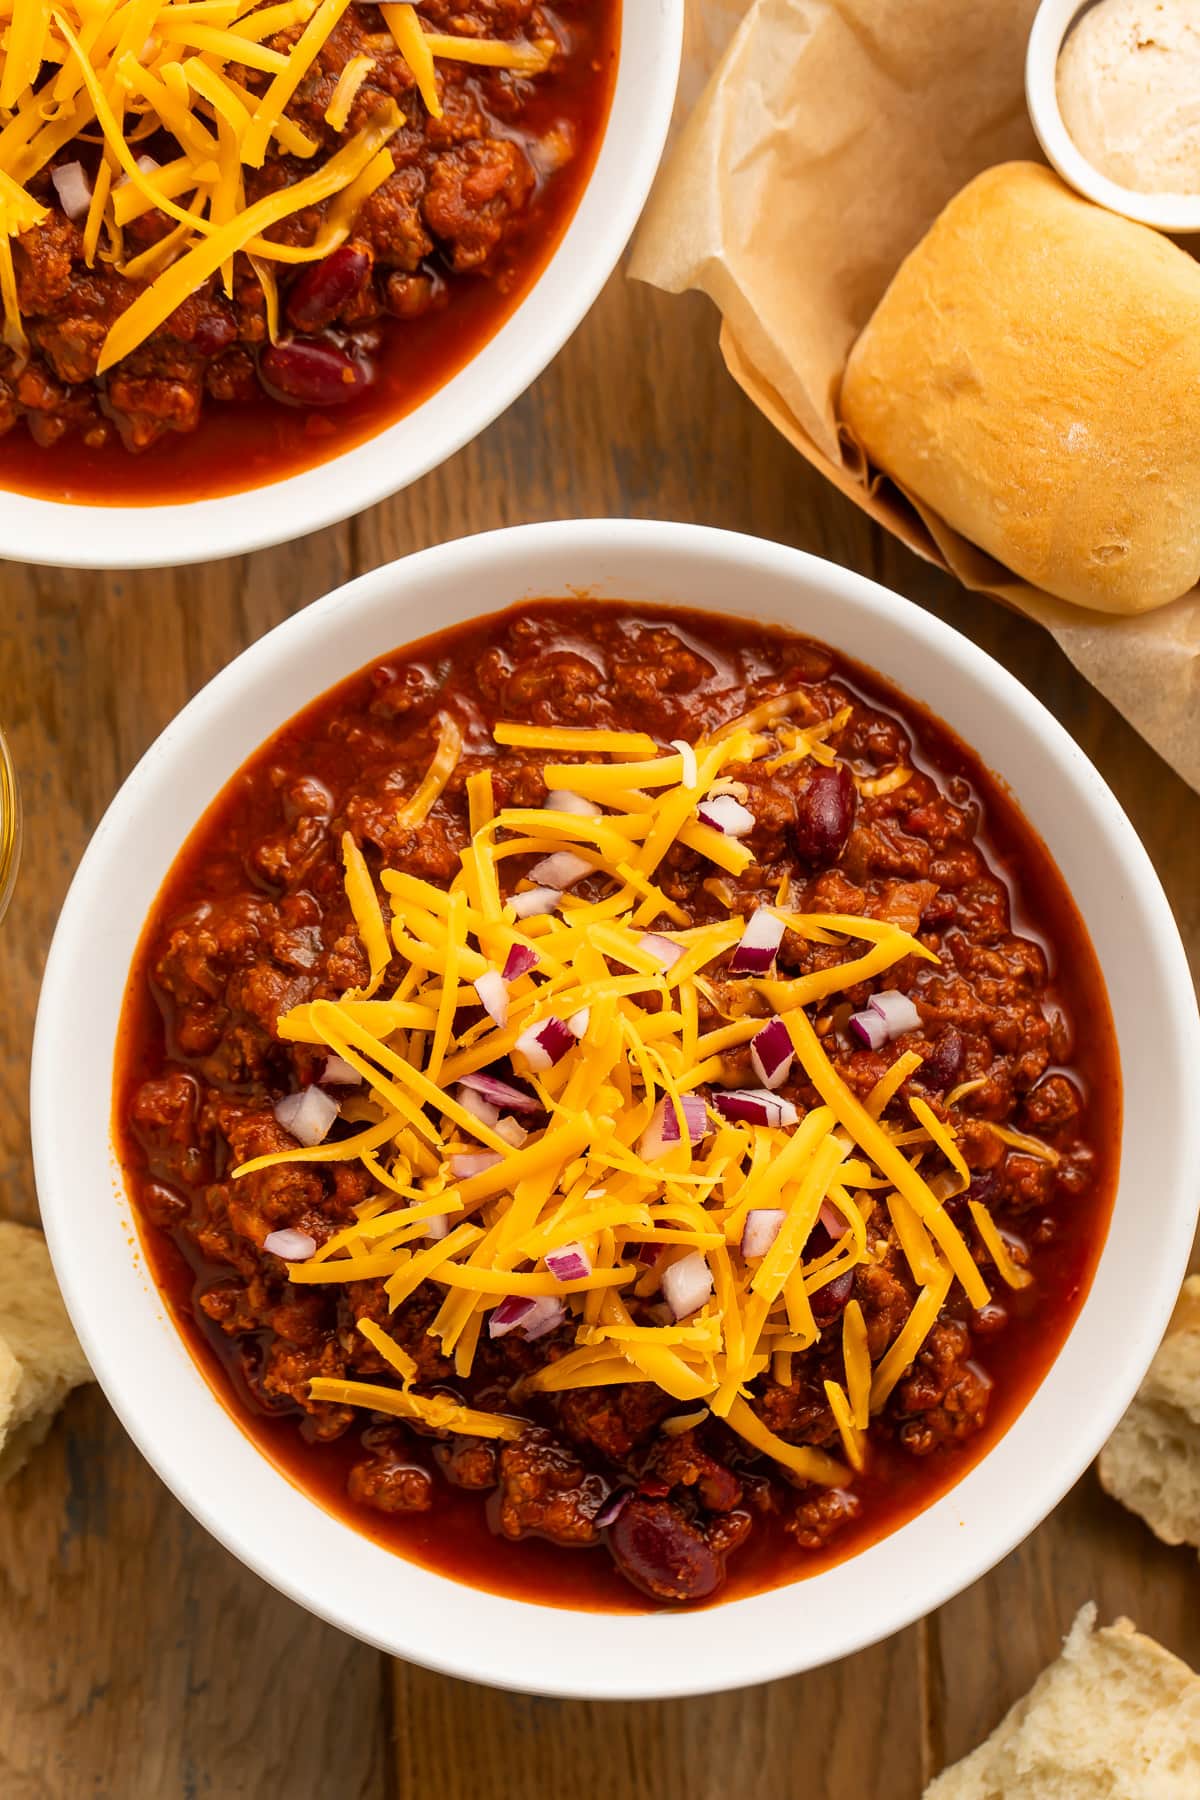 Overhead view of a bowl of dark red Texas Roadhouse chili topped with orange shreds of cheddar cheese and diced red onion on a dark tabletop.